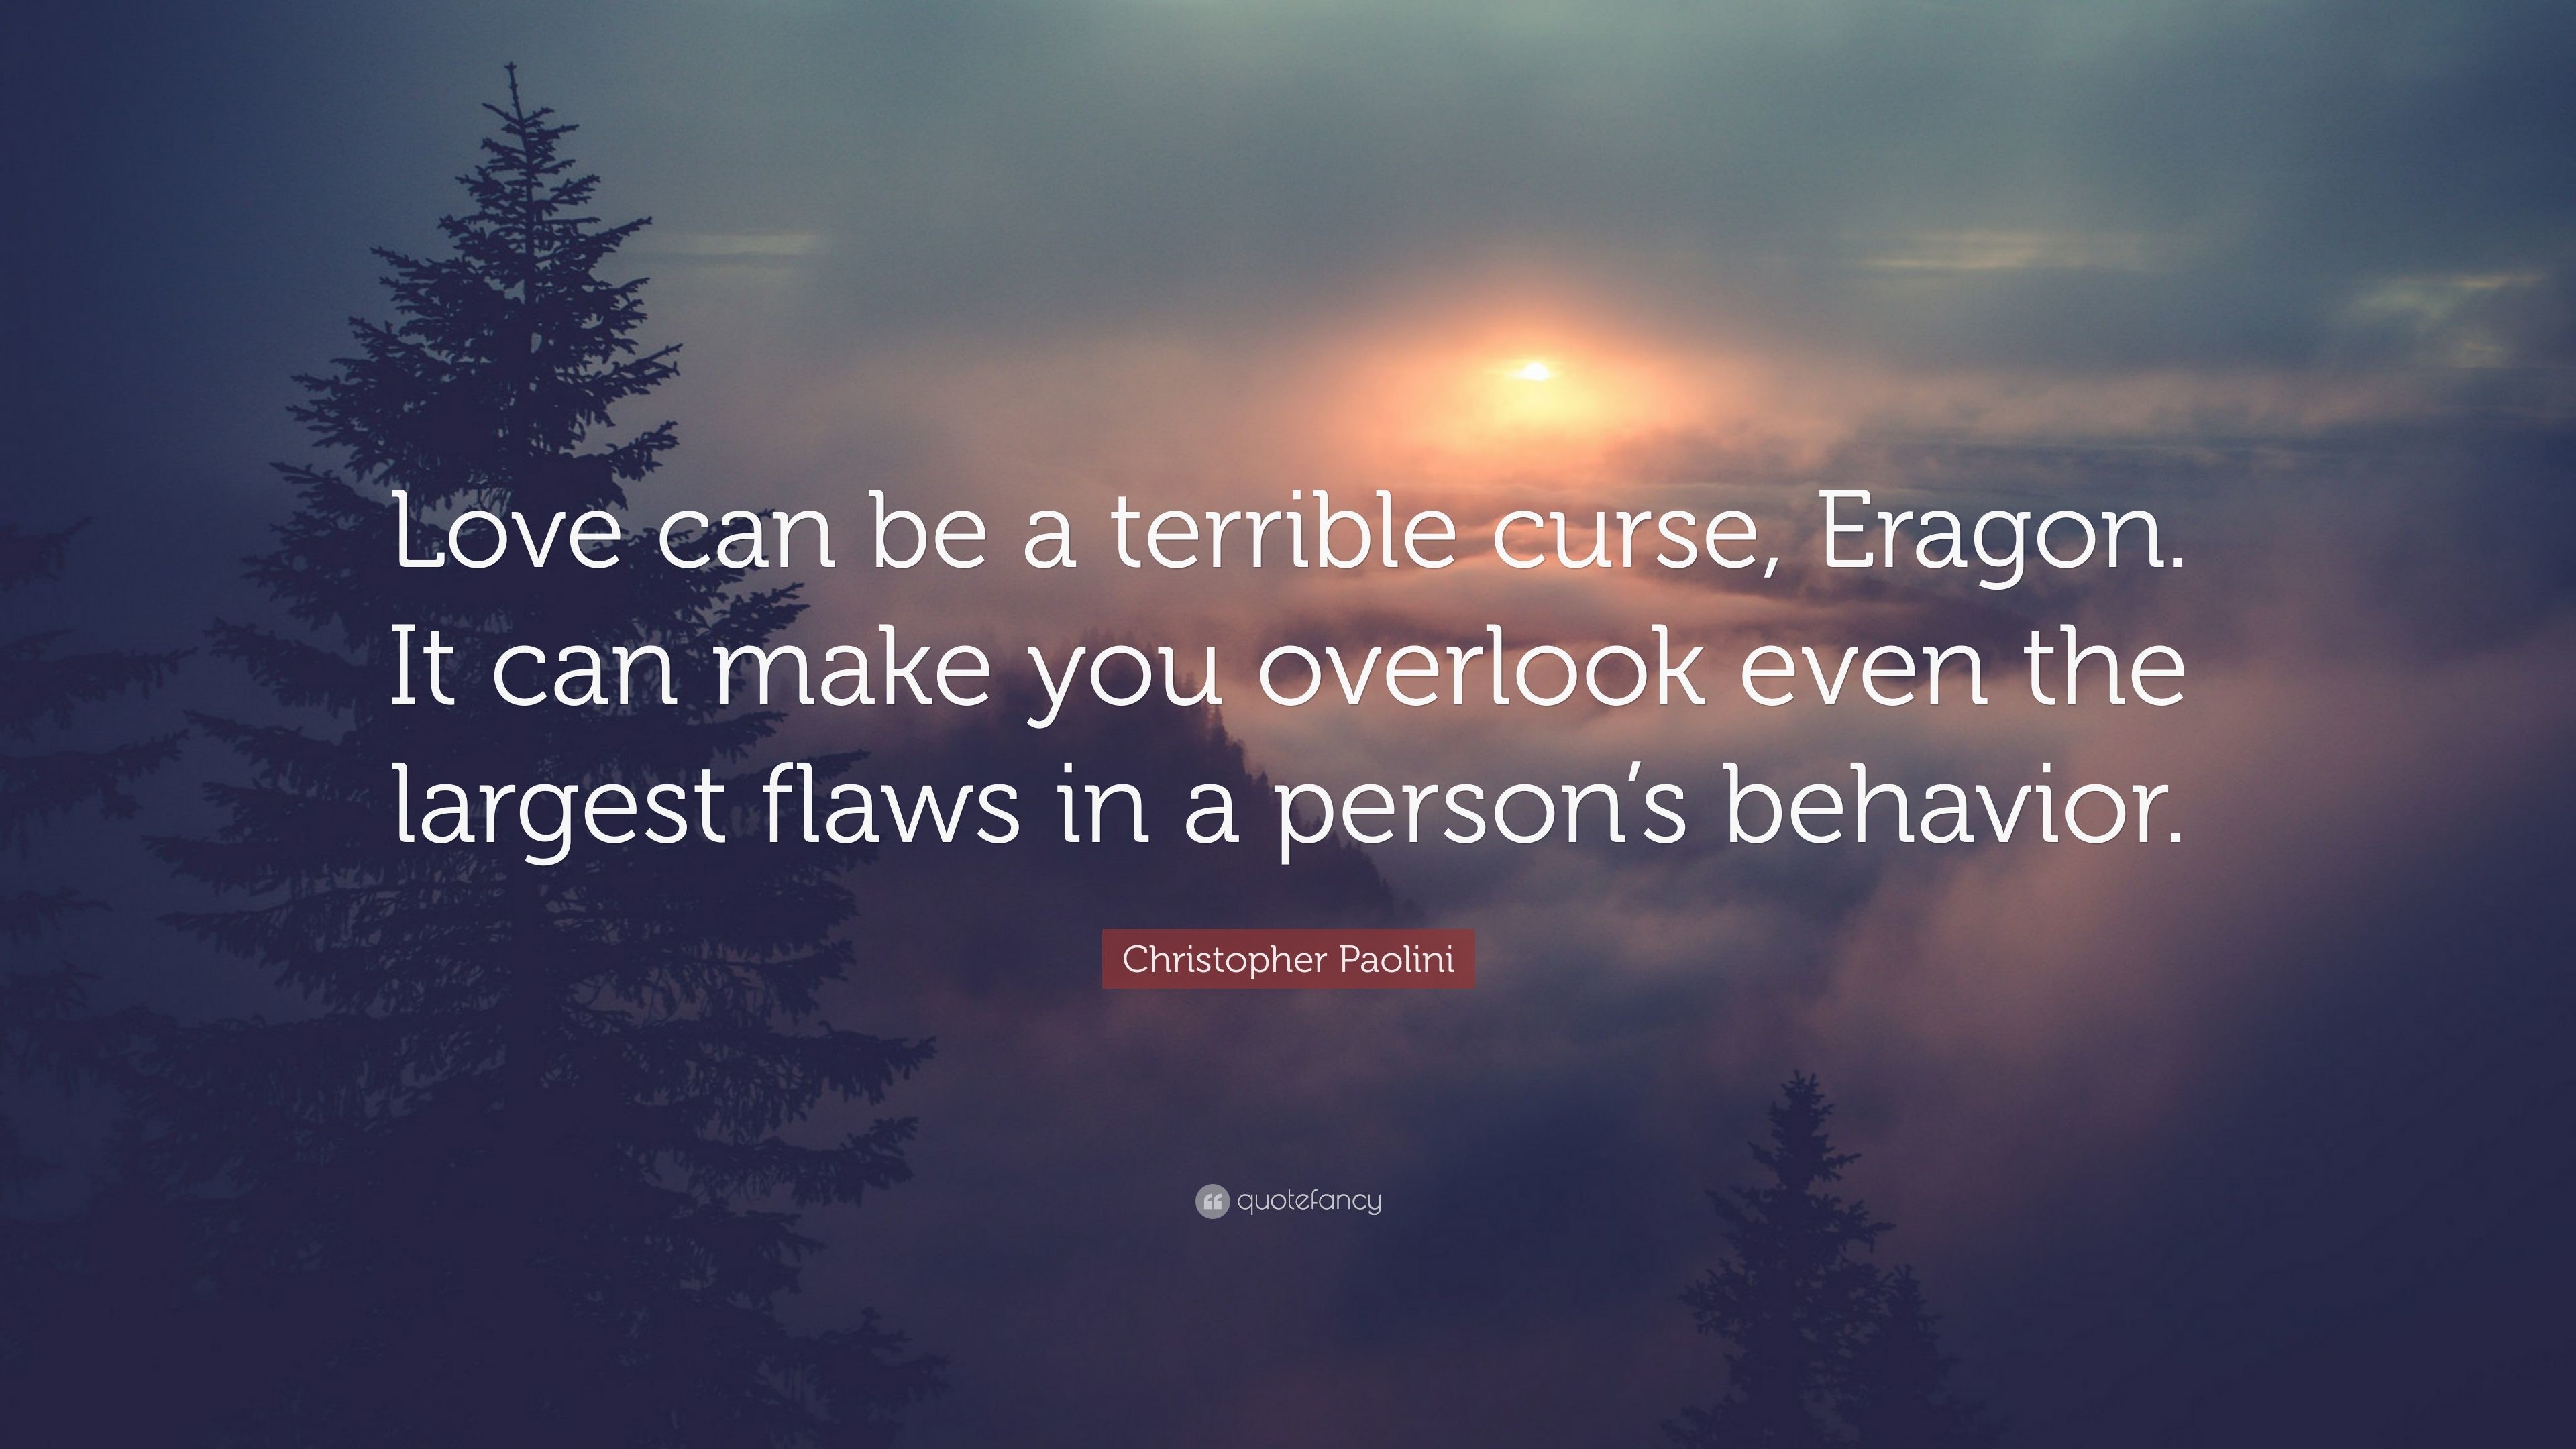 3840x2160 Christopher Paolini Quote: “Love can be a terrible curse, Eragon. It can